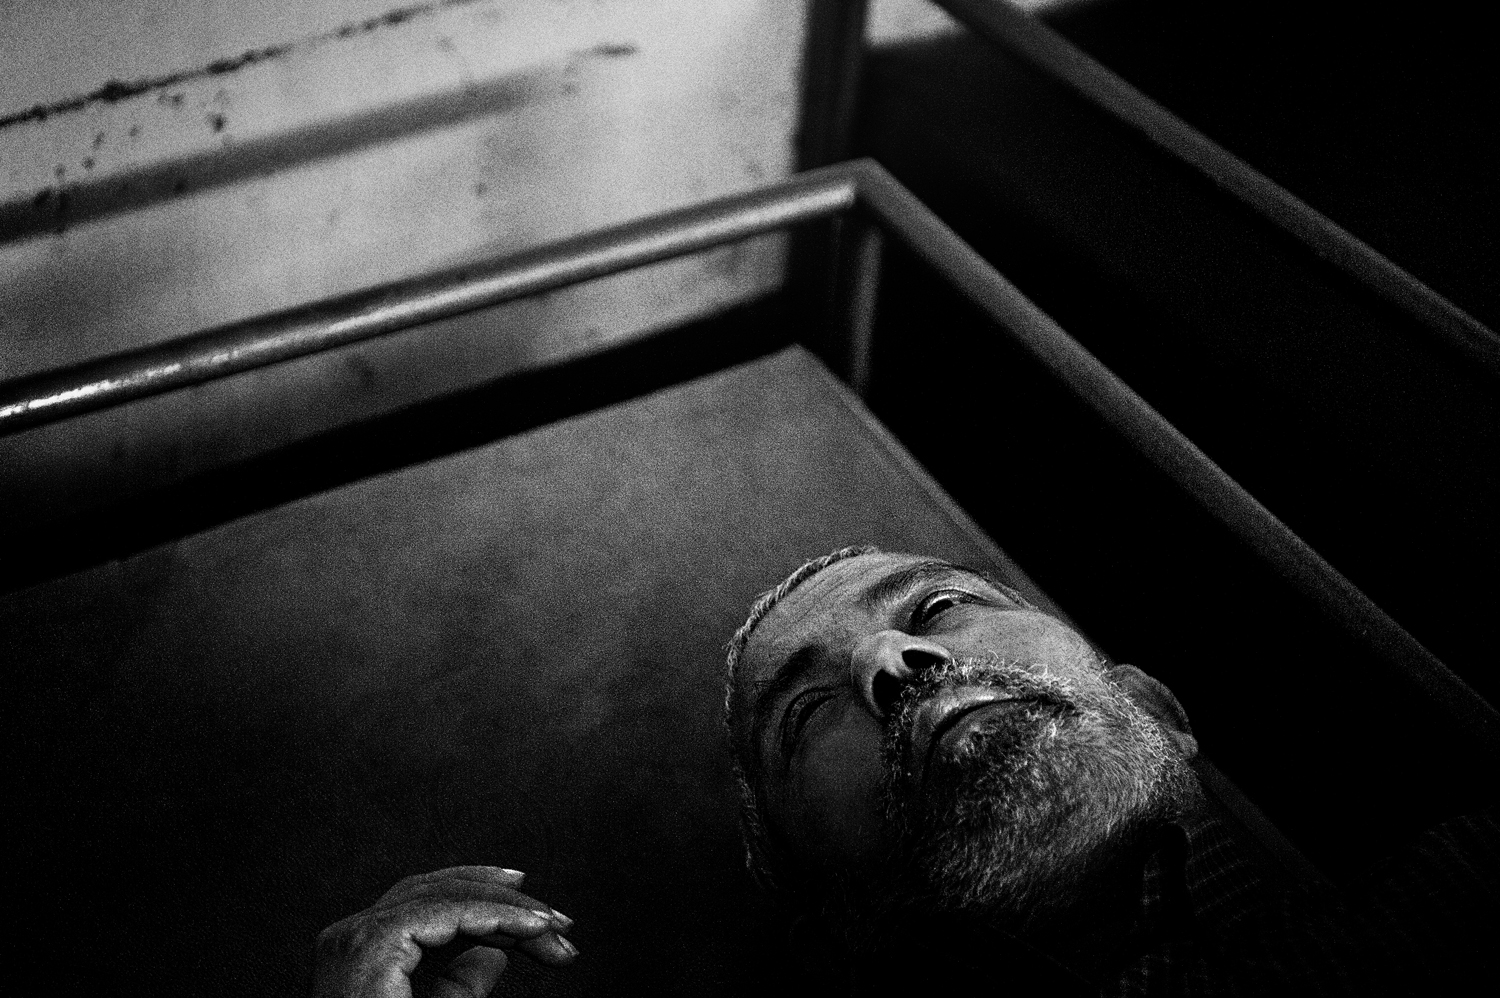 A patient suffering from suspected mental illness on his cot, inside a center run by volunteers in Thodupuzha, Kerala. In the state, the assistance for alcoholics, orphans and the alleged mentally ill is for the most part entrusted to voluntary organizations, with very limited resources.